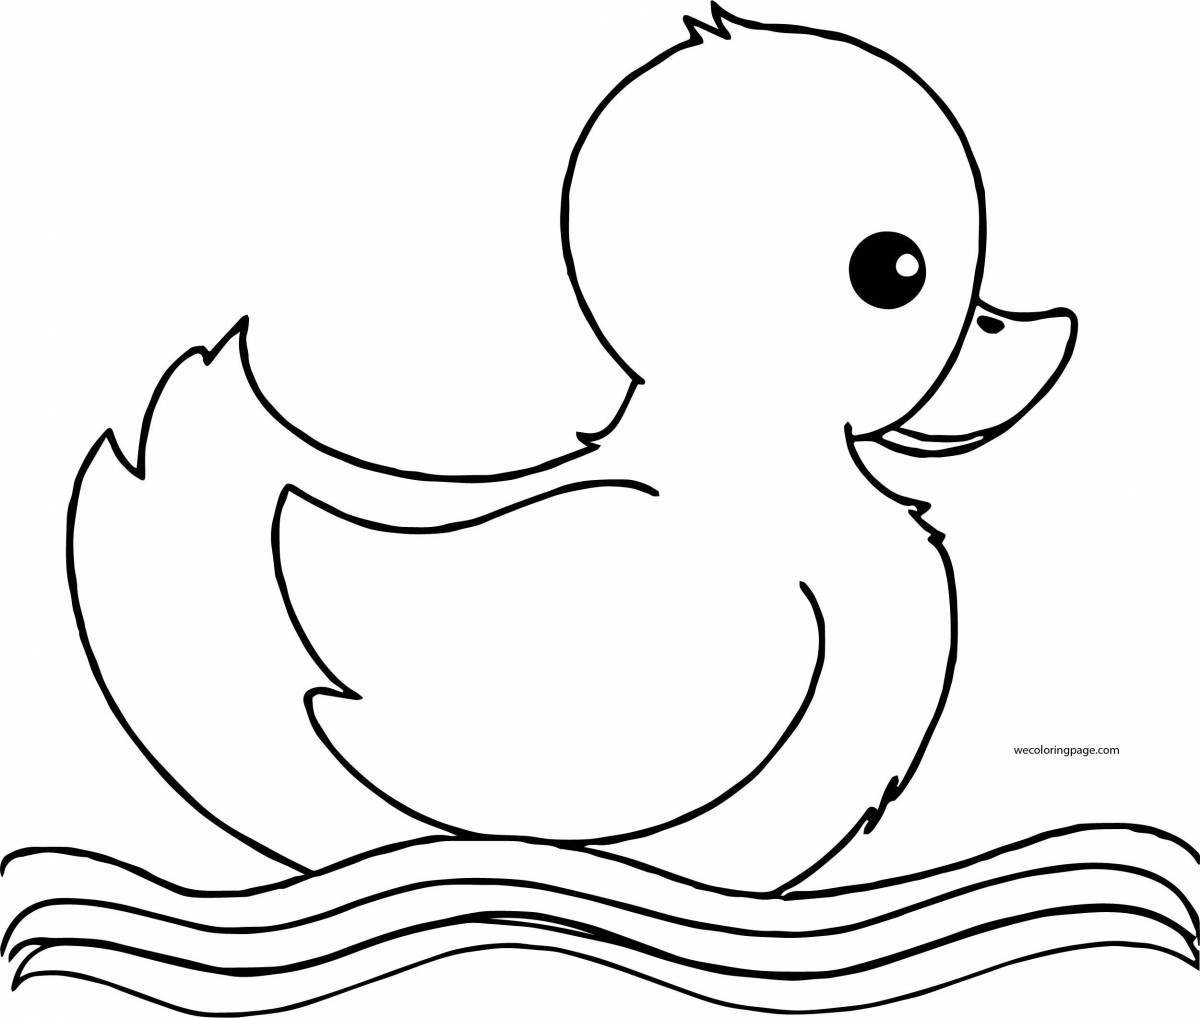 Creative duck coloring book for 3-4 year olds